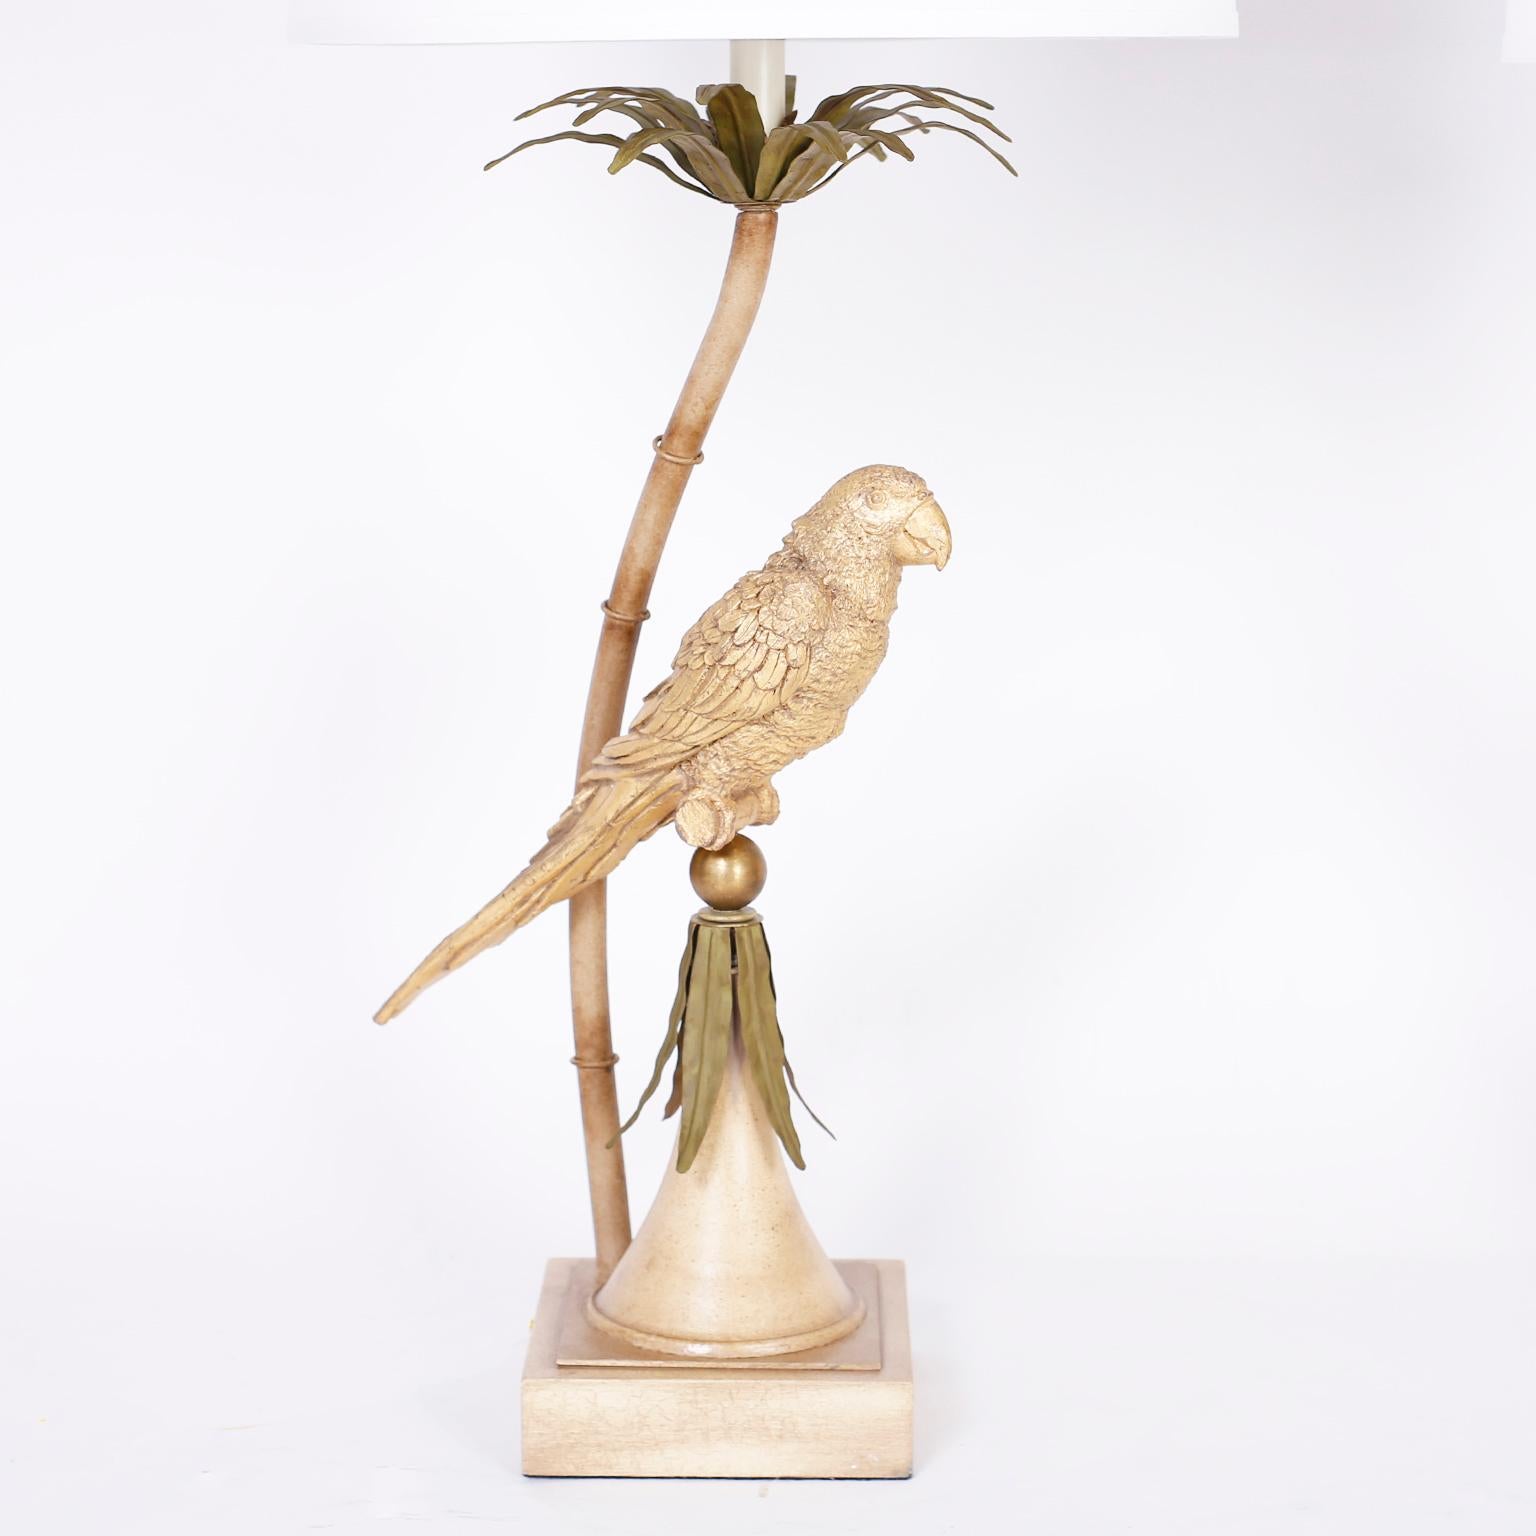 Whimsical pair of midcentury table lamps crafted in painted metal depicting cast metal gold painted parrots under a stylized tole palm tree.